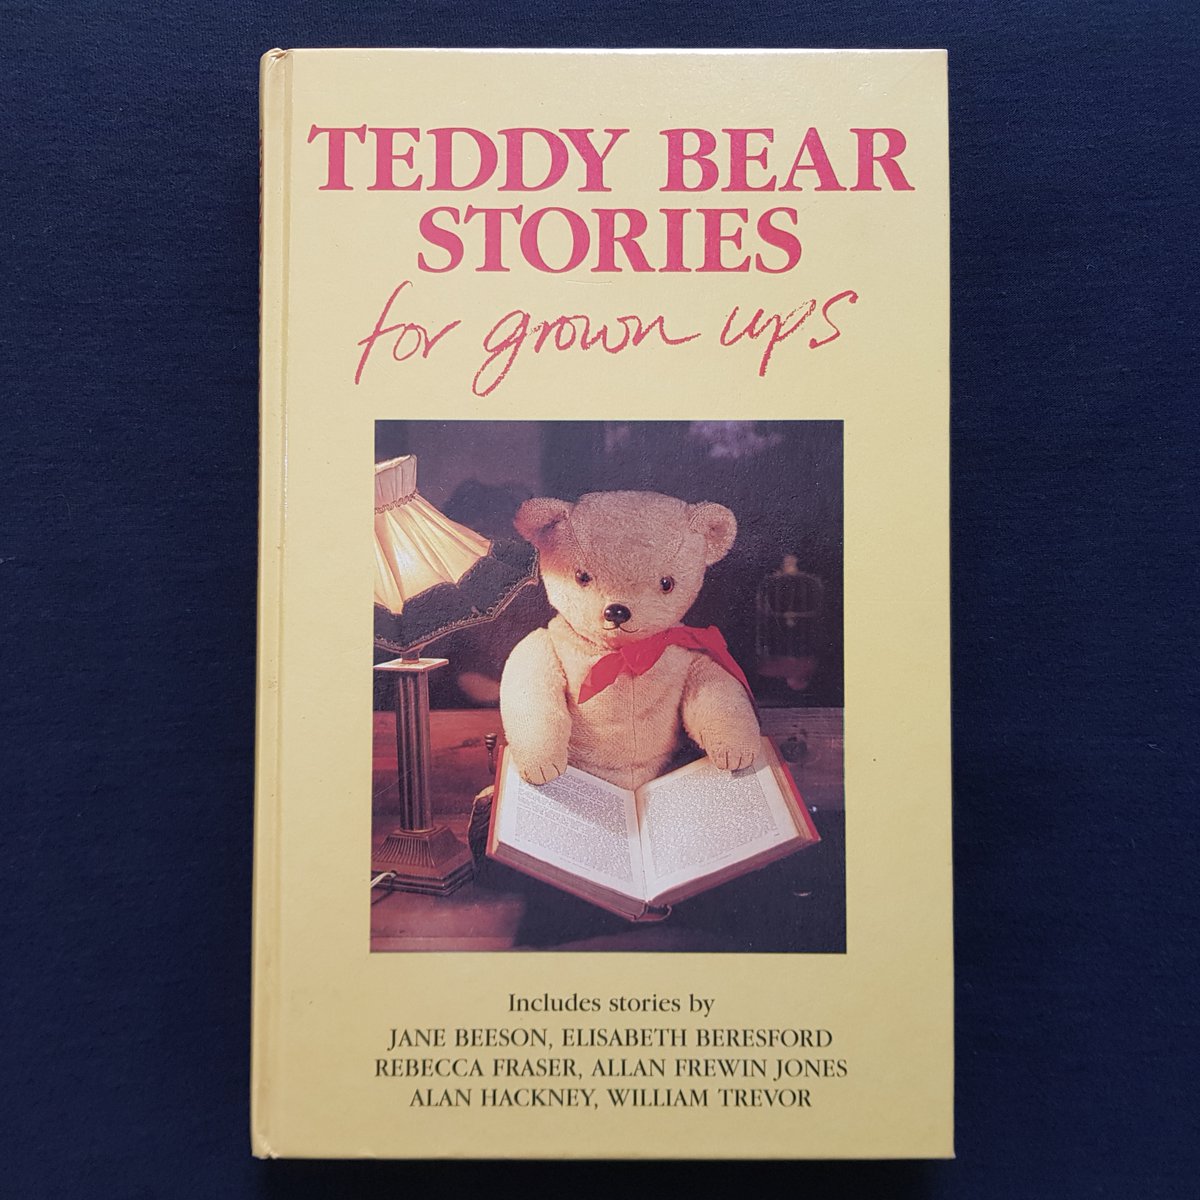 As countless grown ups know, teddy bears are not just for the children. ~ #CatherineTaylor, Introduction to #TeddyBear #Stories for Grown Ups (#BrockhamptonPress 1995) #books #bookcovers #firstsentences #homage on #Instagram instagram.com/tallandtrueweb/